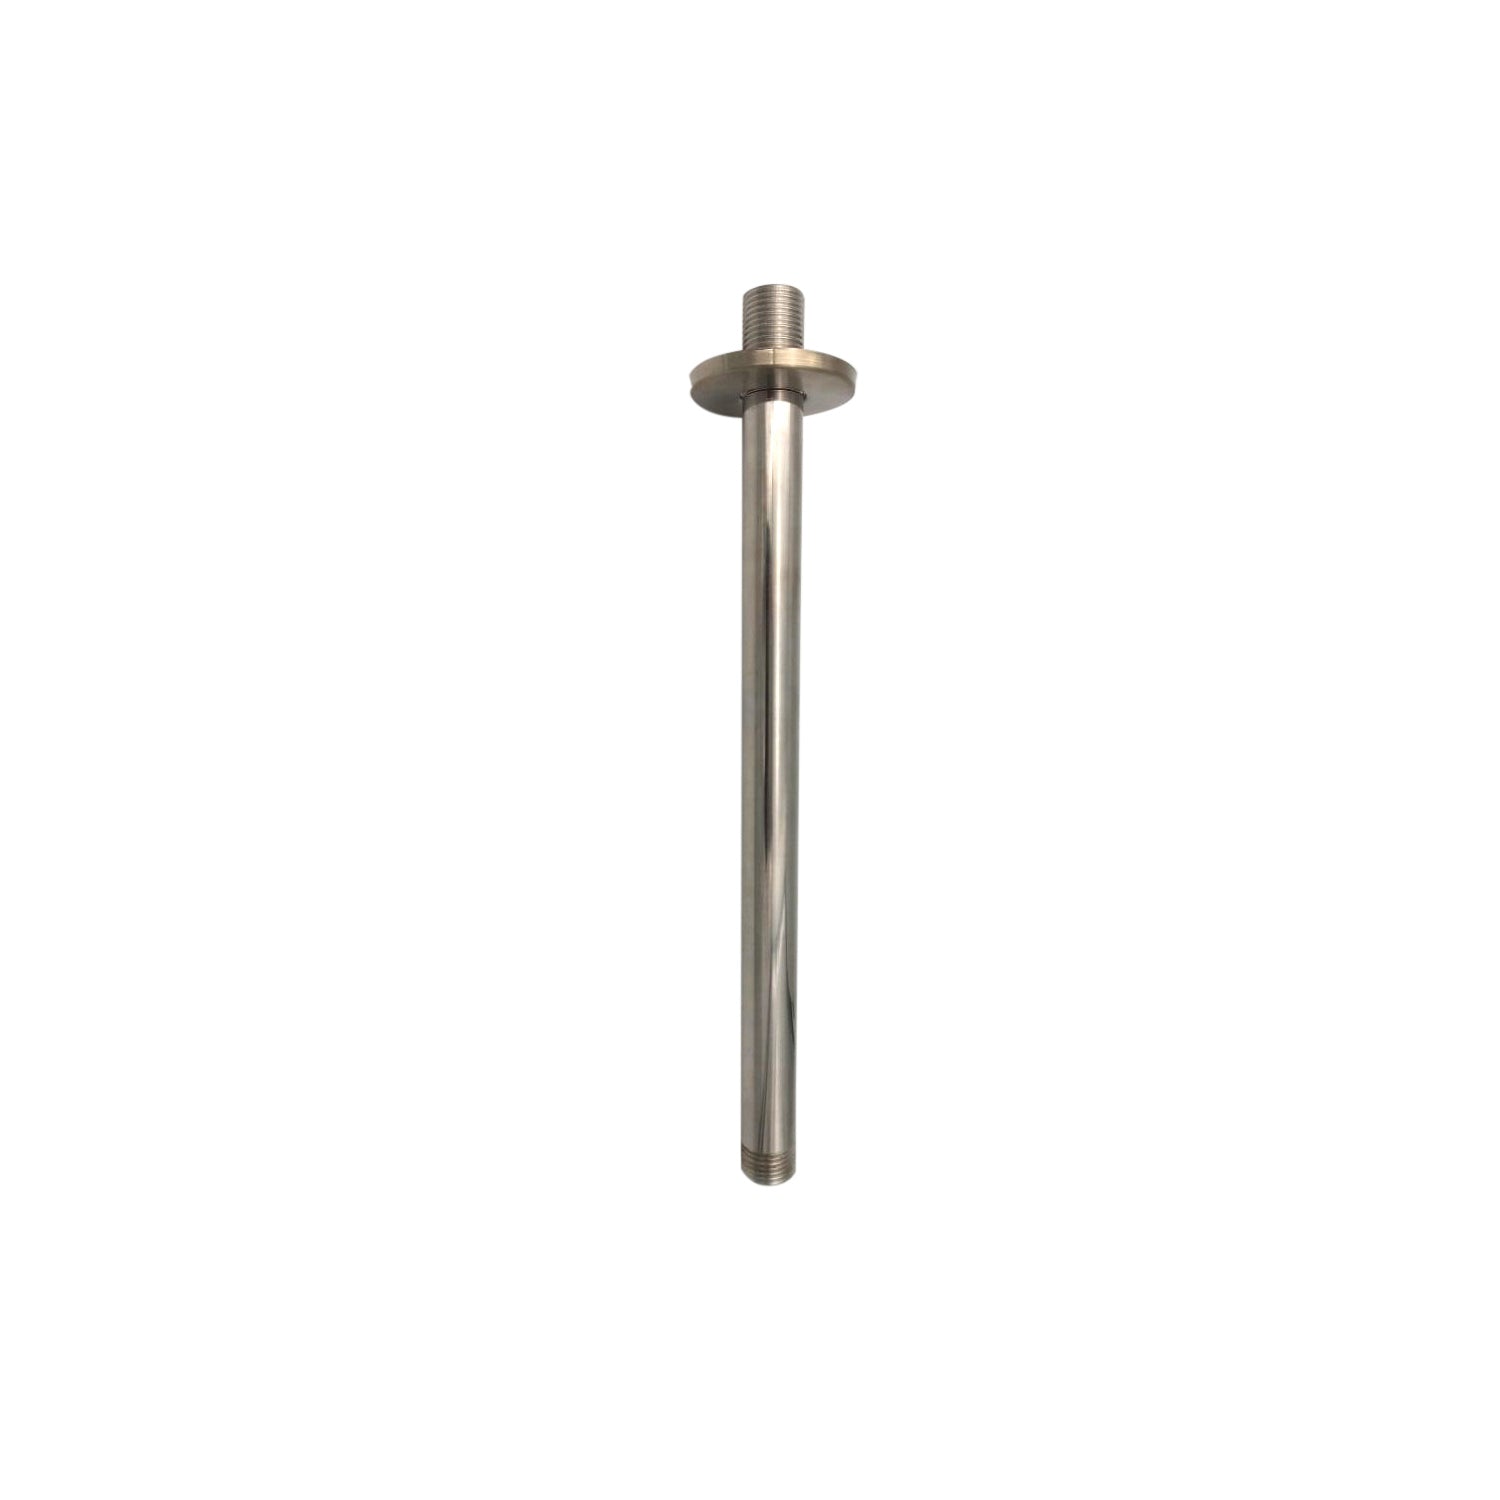 DAX Round Shower Arm, Brass Body, Ceiling Mount, Brushed Nickel Finish, Length 8 Inches (D-F18-8-BN)